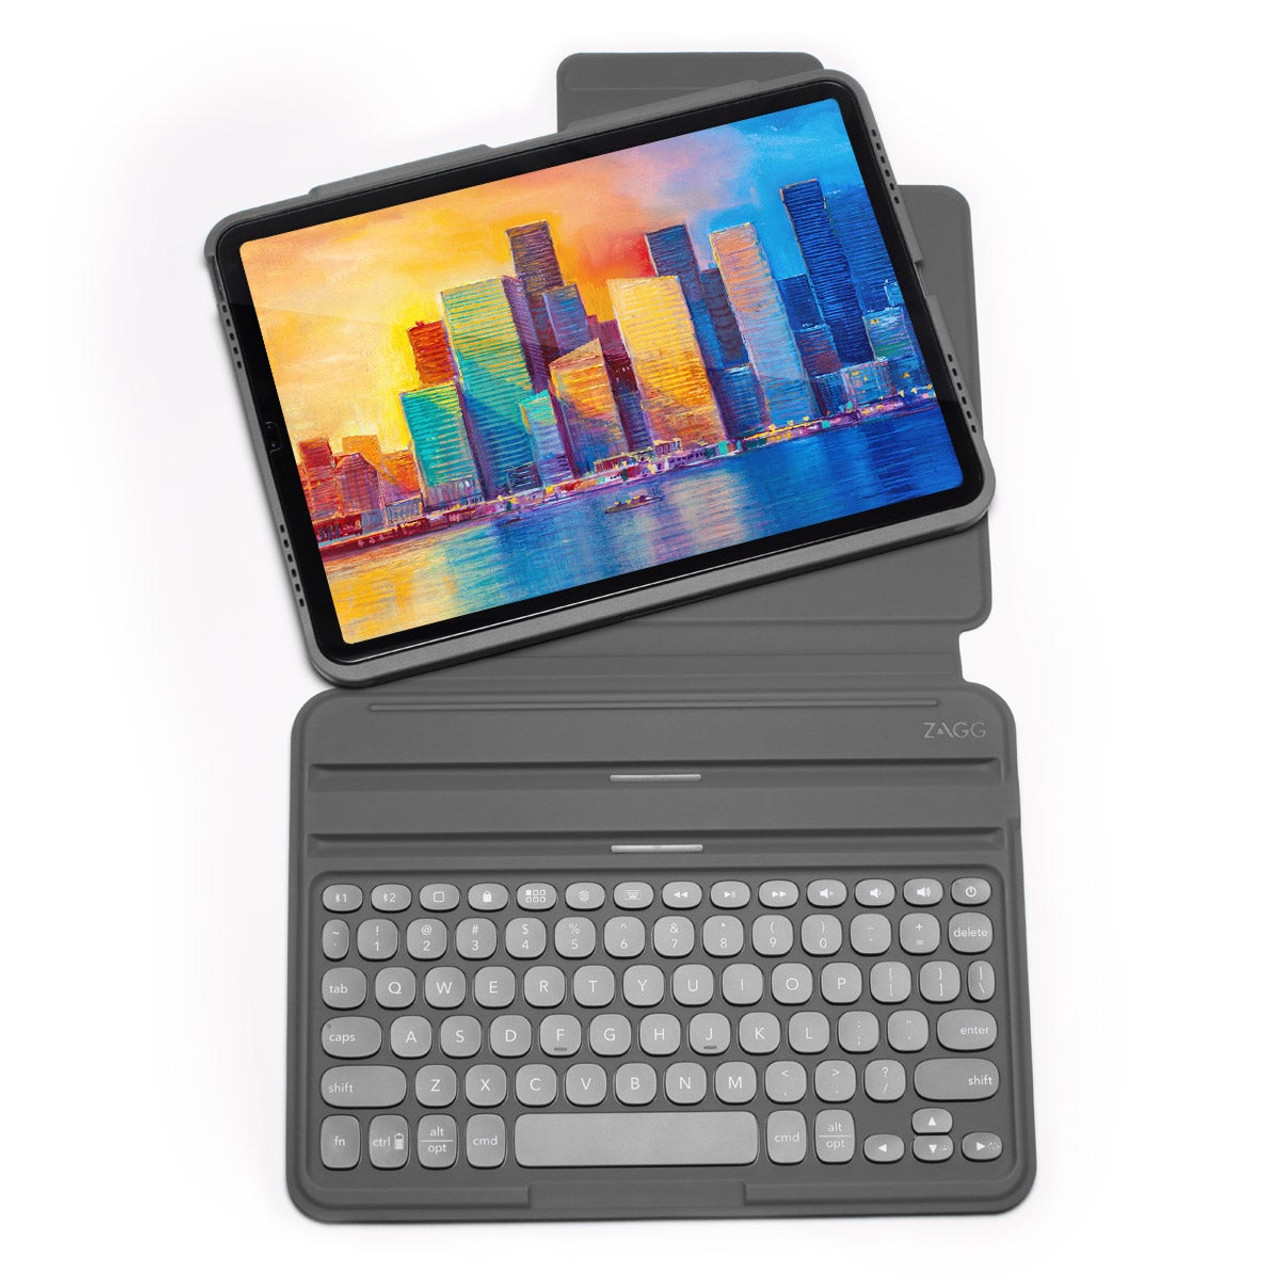  Buy iPad Pro 12.9 inch 2021 Case with Keyboard, Keyboard (for  12.9-inch iPad Pro - 5th Generation, 4th/3rd Generation) - Wireless  Detachable - with Pencil Holder for 2021 iPad Pro 12.9